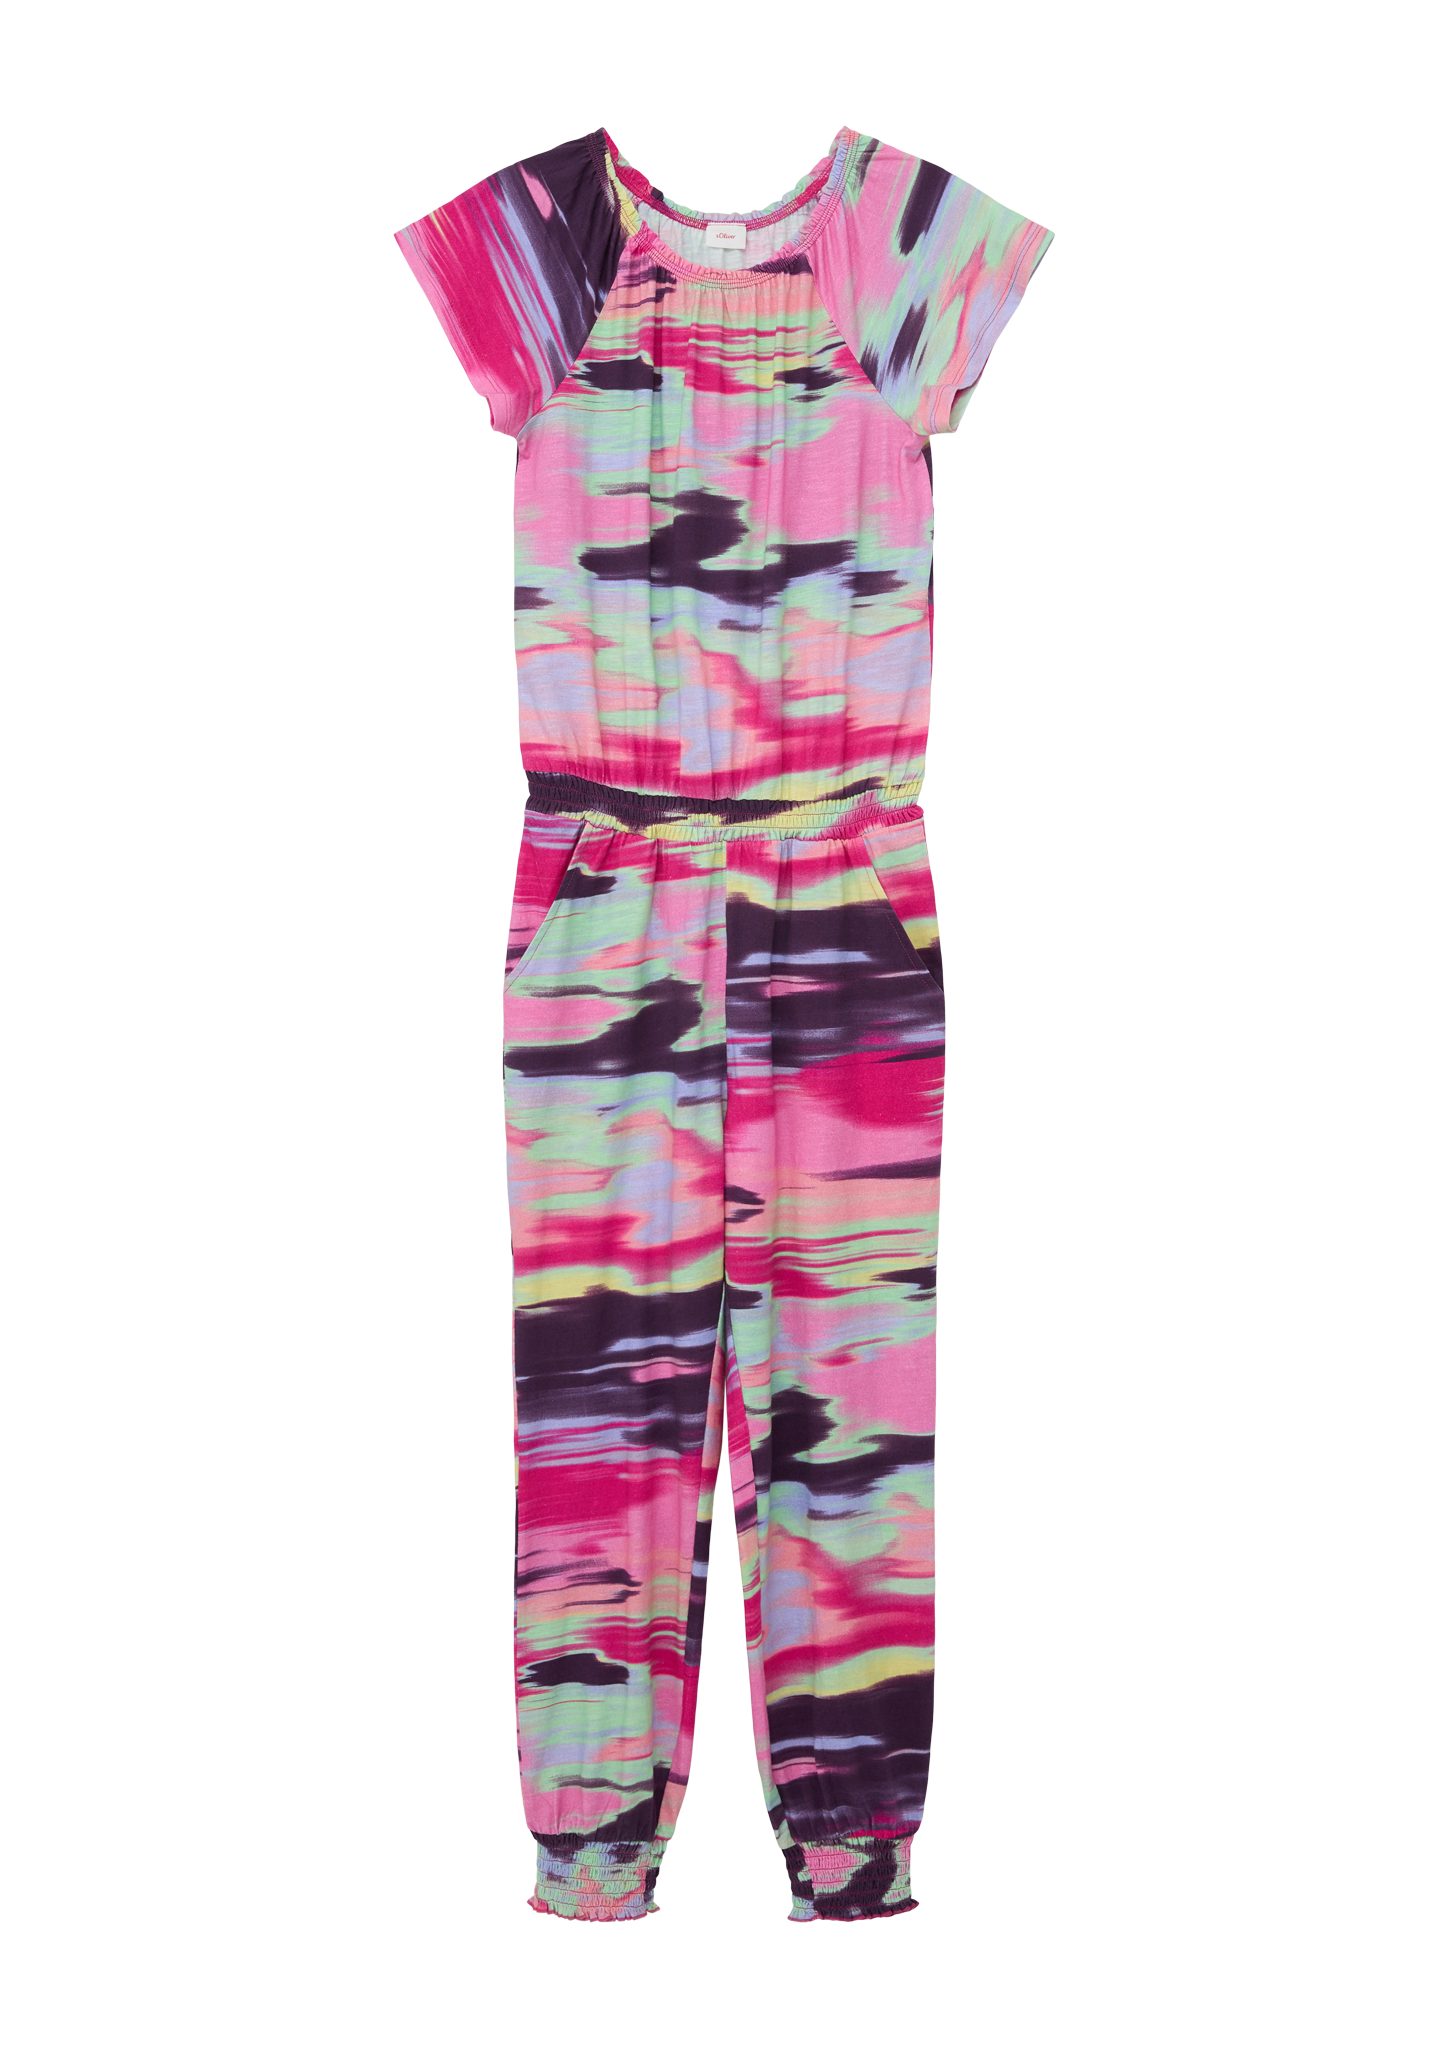 Smok-Detail Overall Print Overall abstraktem s.Oliver mit